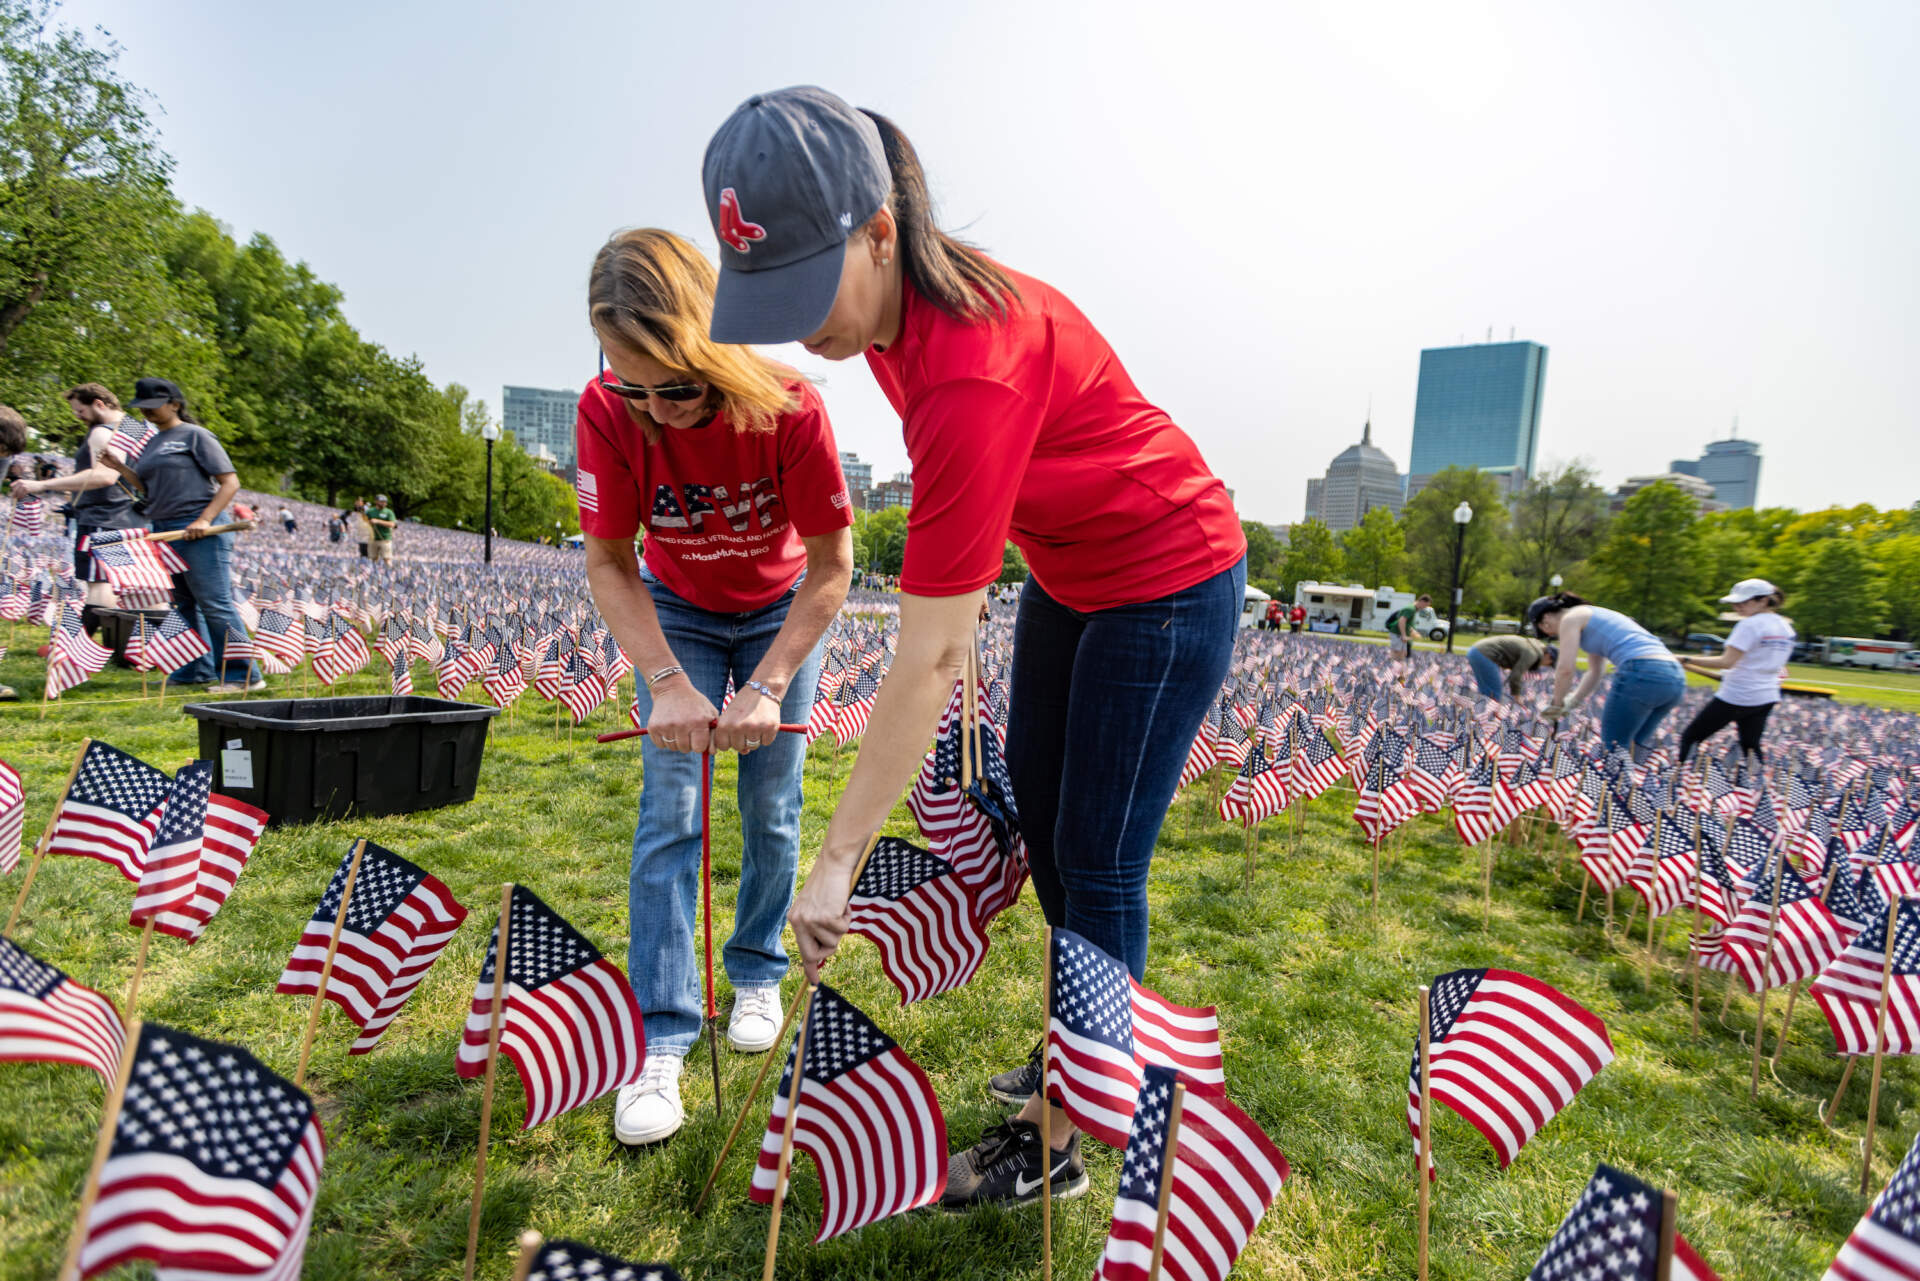 Volunteers Kim Bullock and Monique Carbonneau plant American flags into the ground of the Boston Common for the upcoming Memorial Day weekend. (Jesse Costa/WBUR)